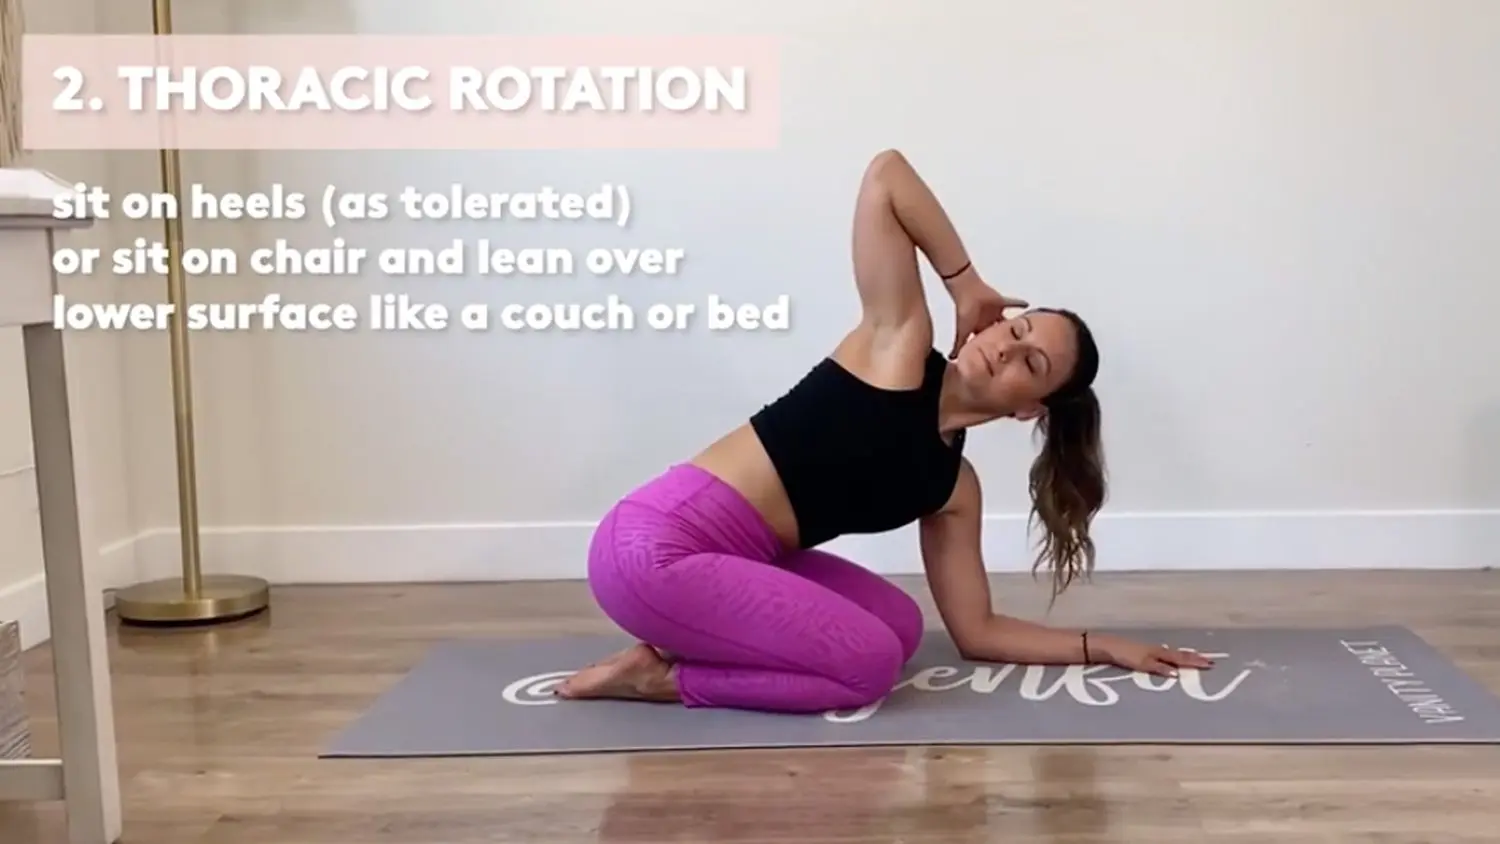 neck rotation yoga - What are the benefits of neck rolls in yoga